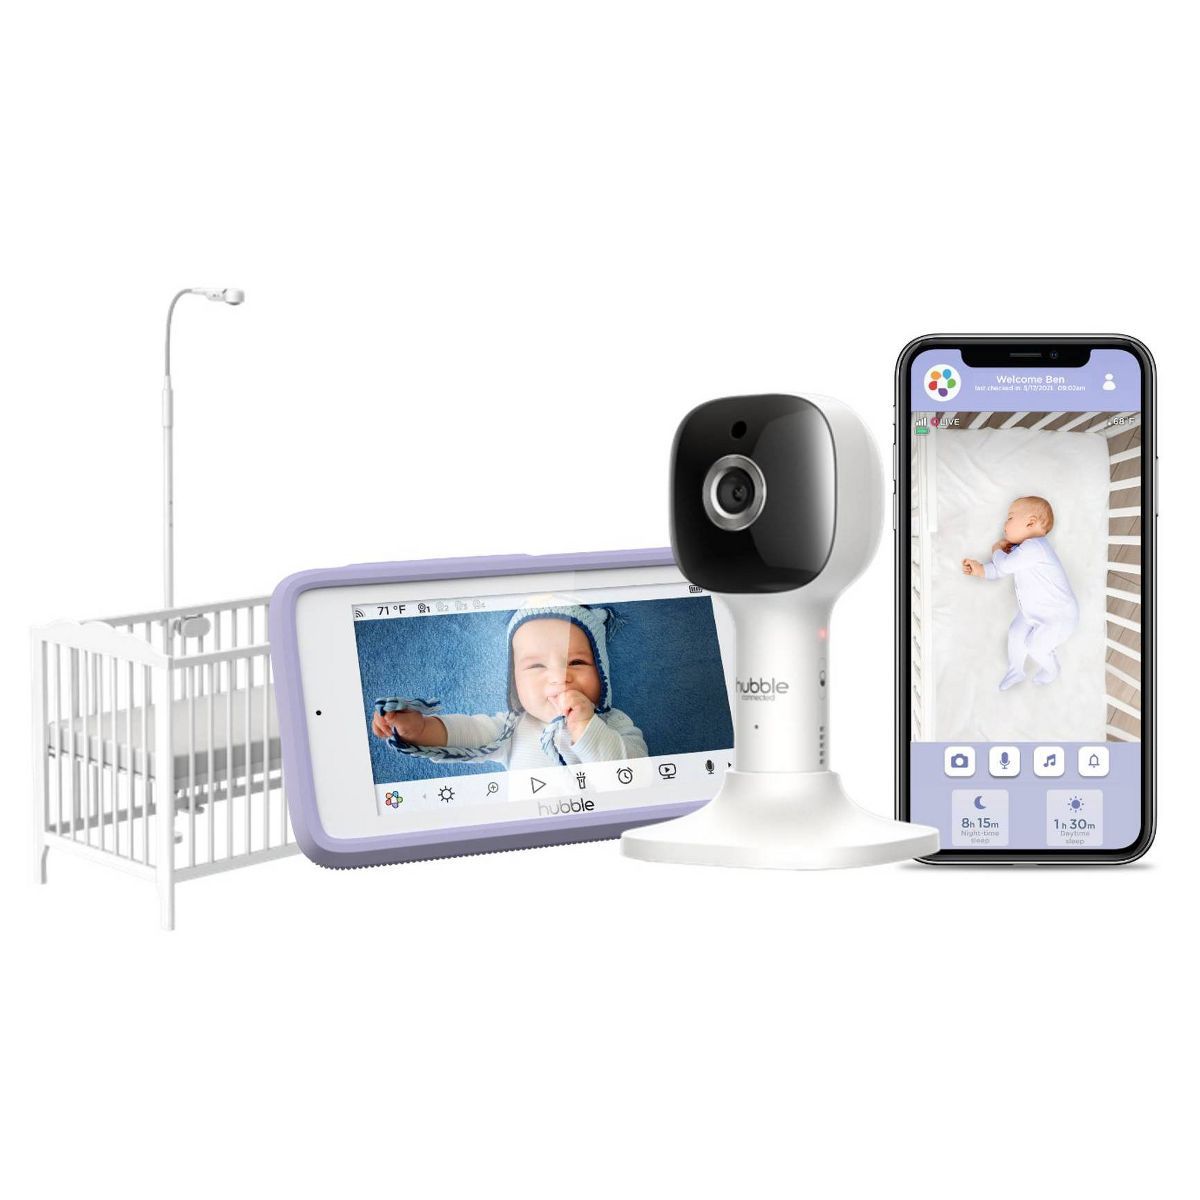 Hubble Connected Nursery Pal Crib Edition 5" Smart HD Baby Monitor with Crib Mount | Target